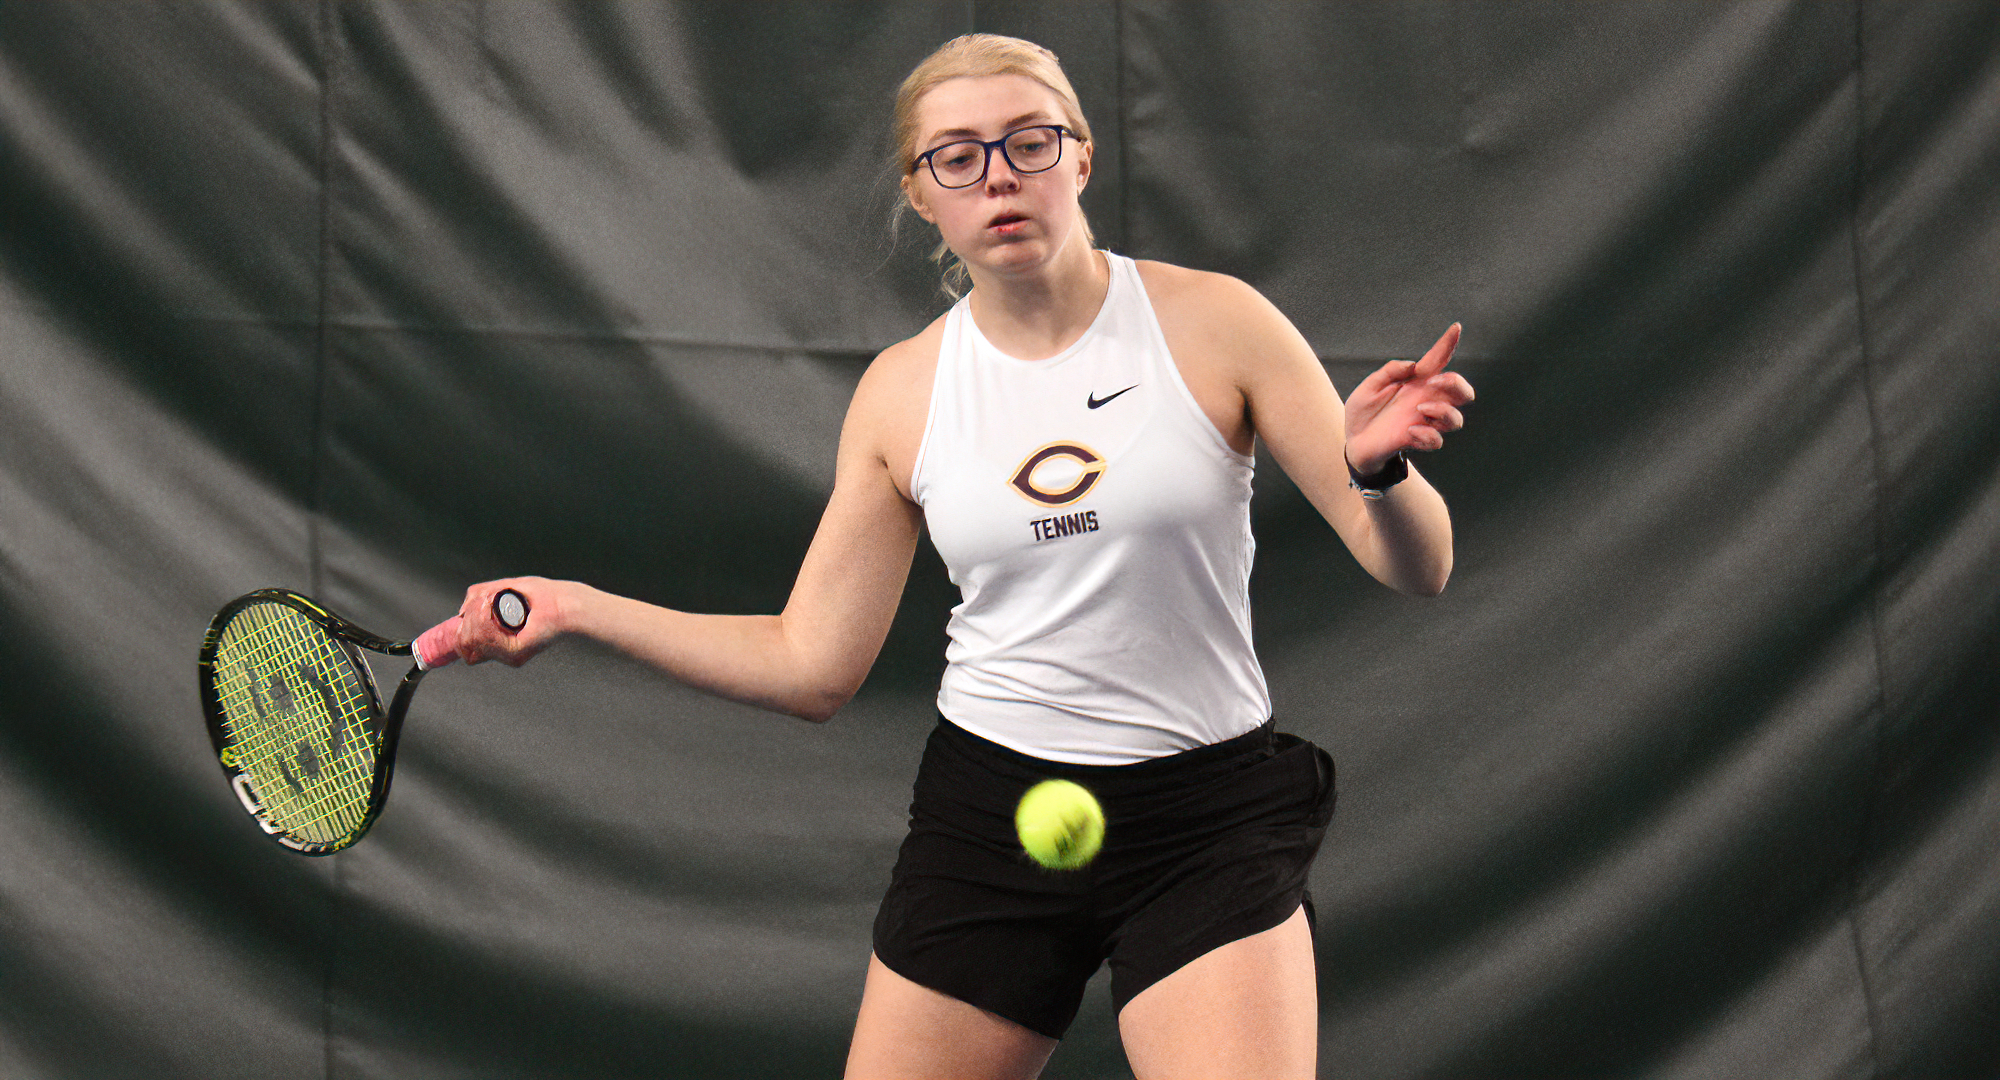 Sophomore Lizzie Allan won both her singles matches to help Concordia beat California (Pa.) 4-3. Allan is now 8-5 in singles play this year.